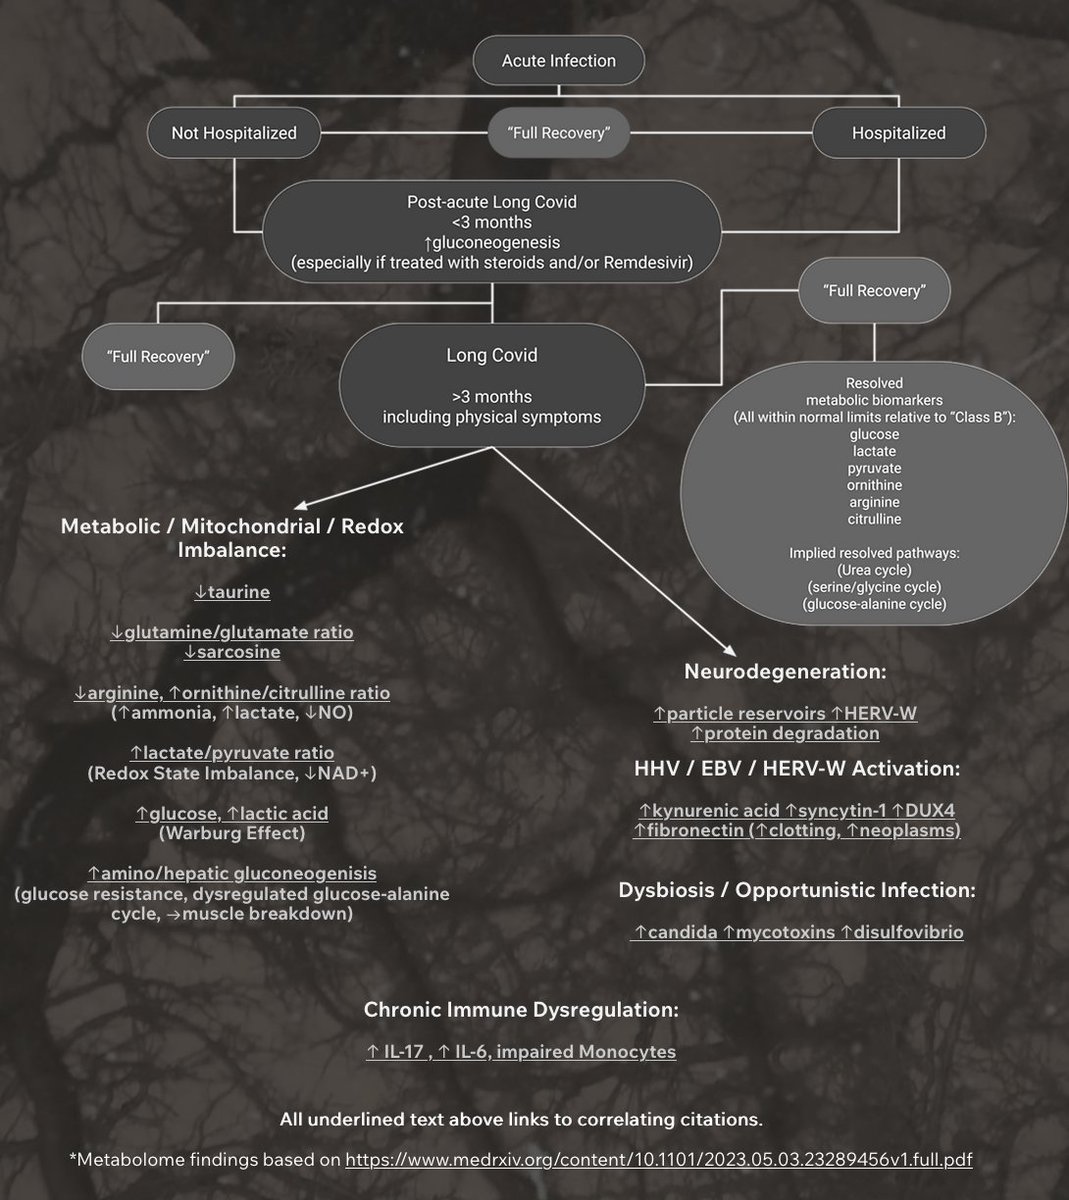 I made a flow chart in early '23 based off a metabolomics paper that presented Long Covid as a disease of prolonged human metabolic reprogramming and dysregulation(prolonged gluconeogenesis). These are objective findings that indicate persistent HMRD in those who do not recover.